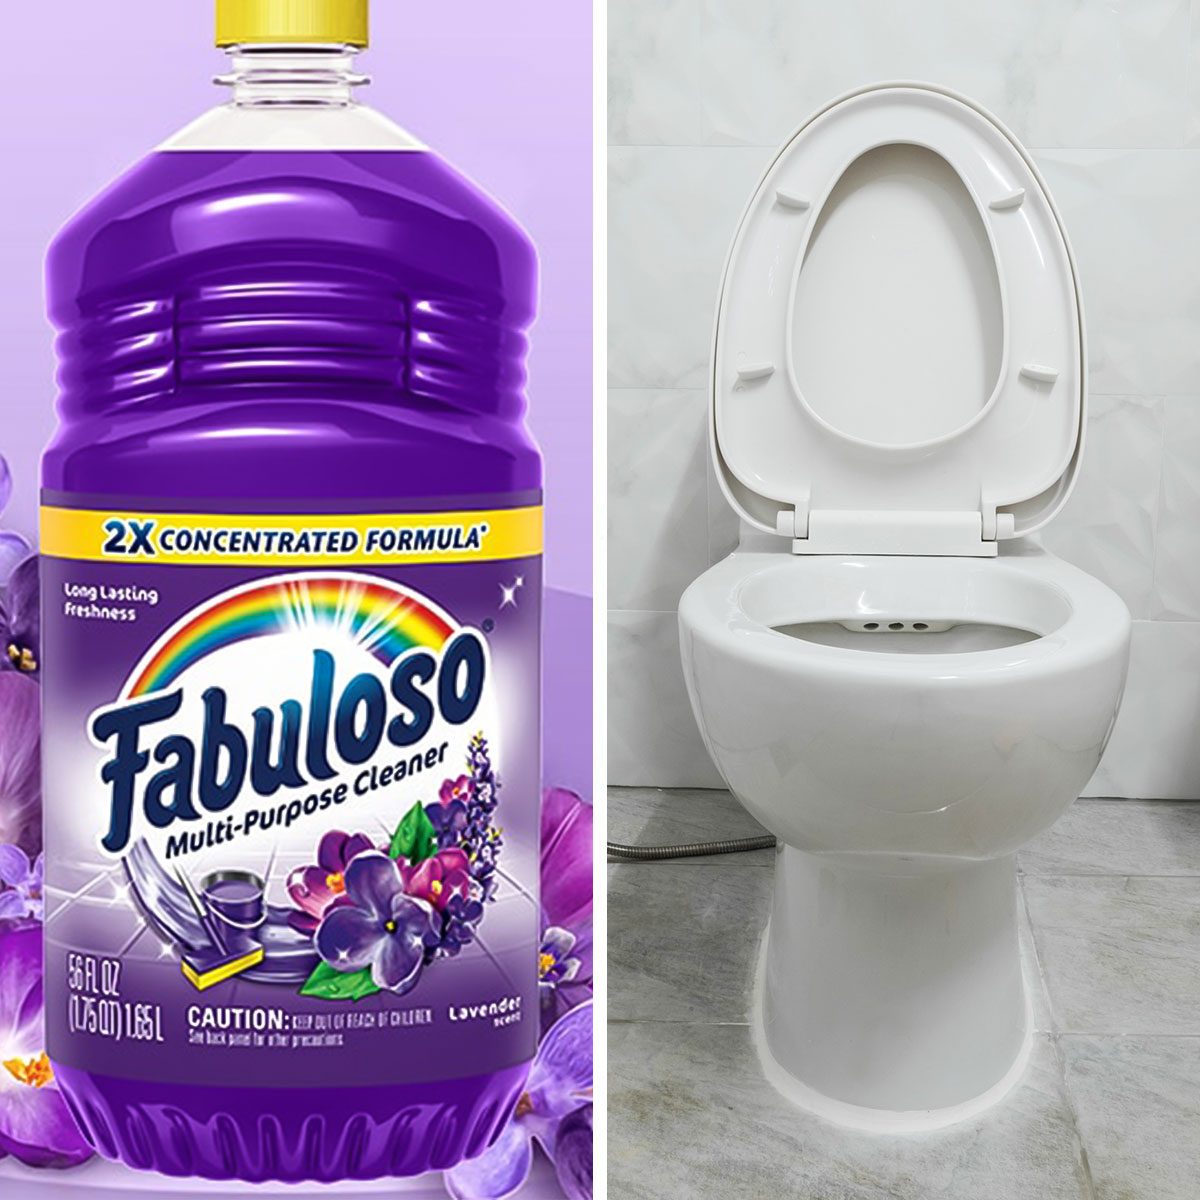 Fabuloso in the Toilet Tank: Does It Work?